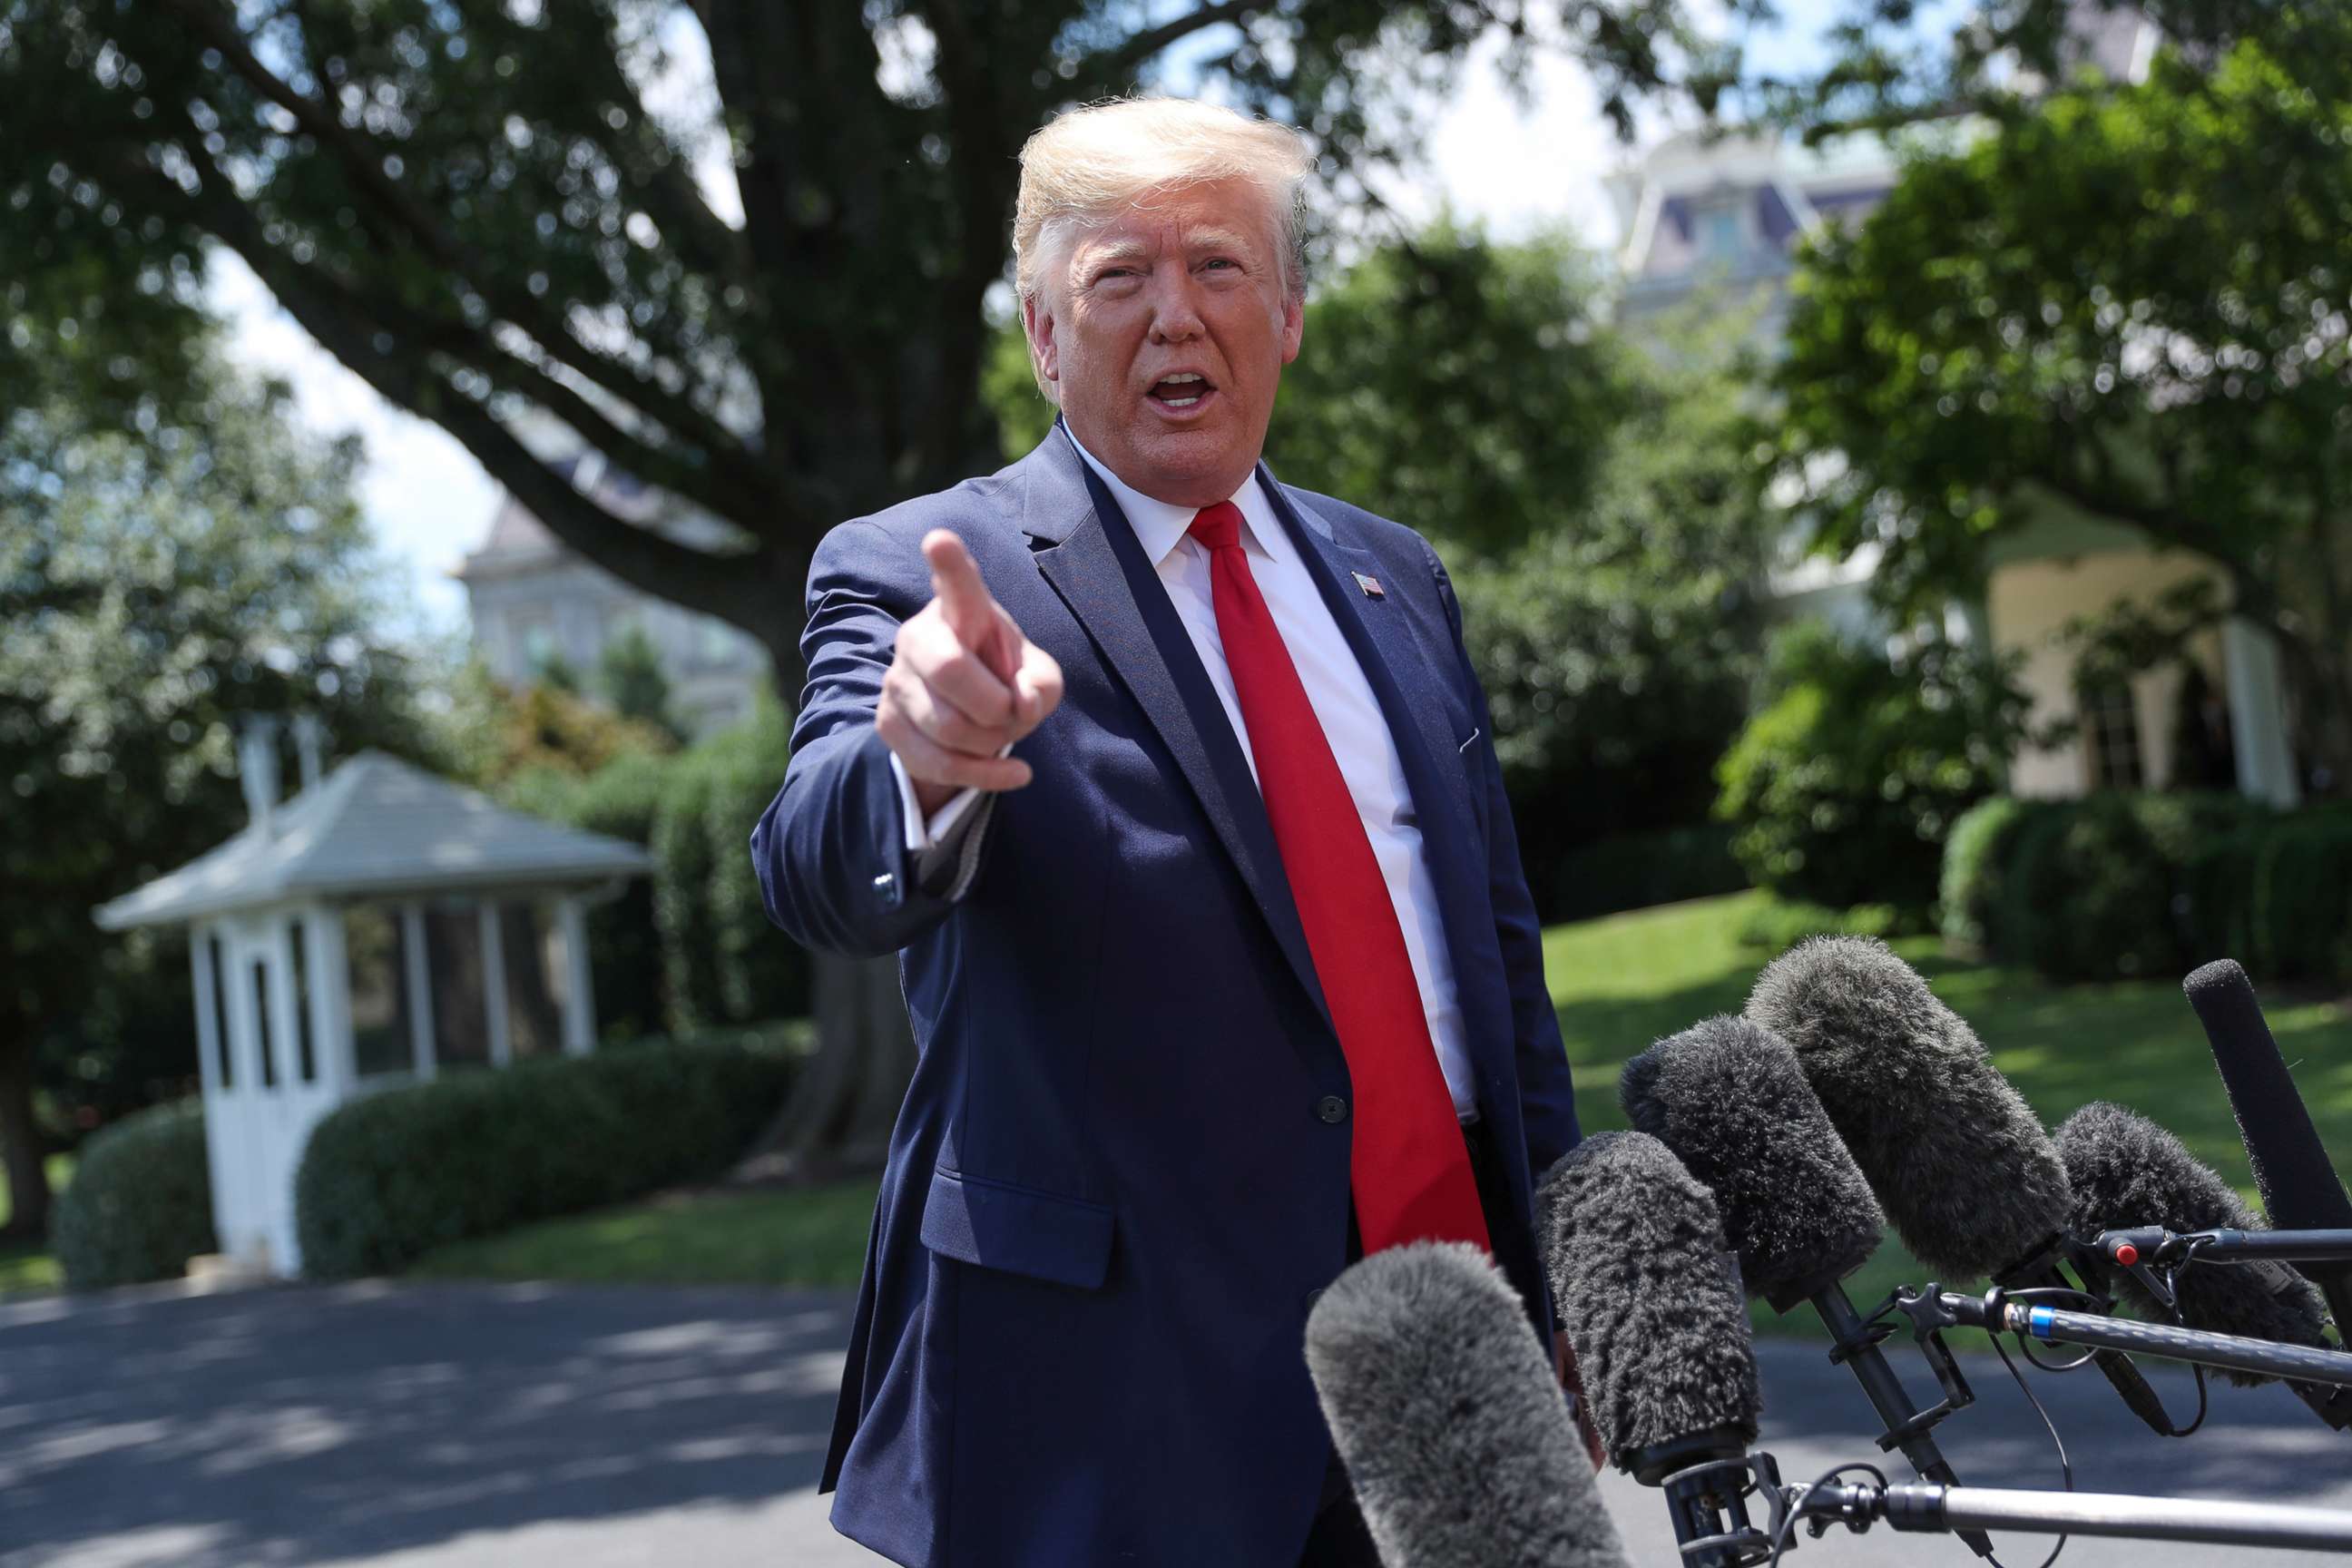 PHOTO: President Donald Trump talks to reporters as he departs for travel to the G20 Summit in Osaka, Japan outside the White House, June 26, 2019.